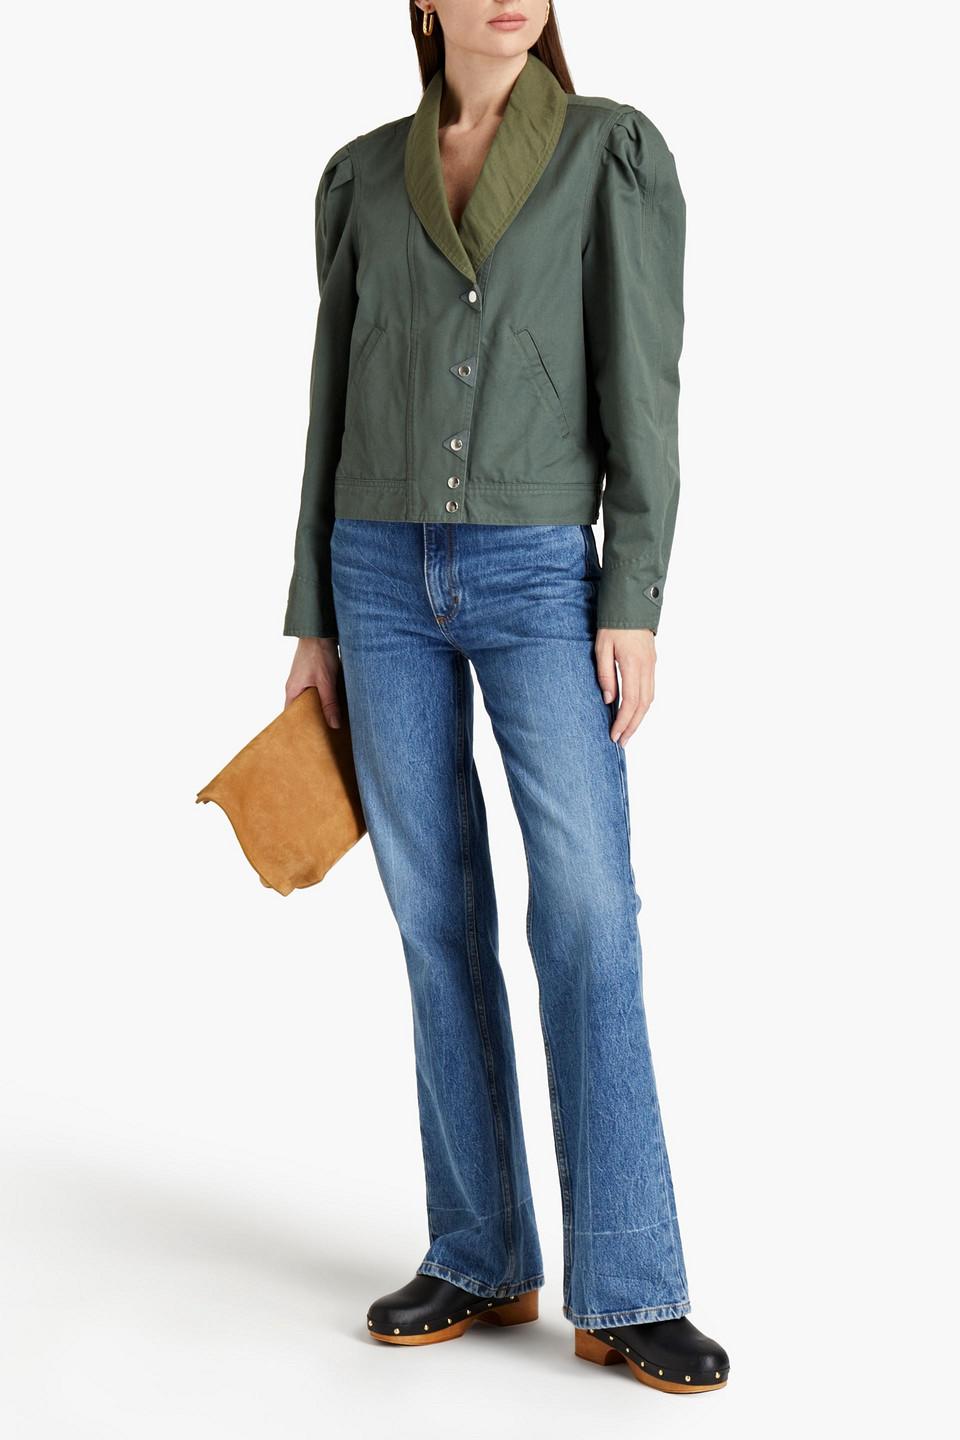 Étoile Isabel Marant Priest Two-tone Suede-trimmed Cotton-canvas Jacket in  Green | Lyst